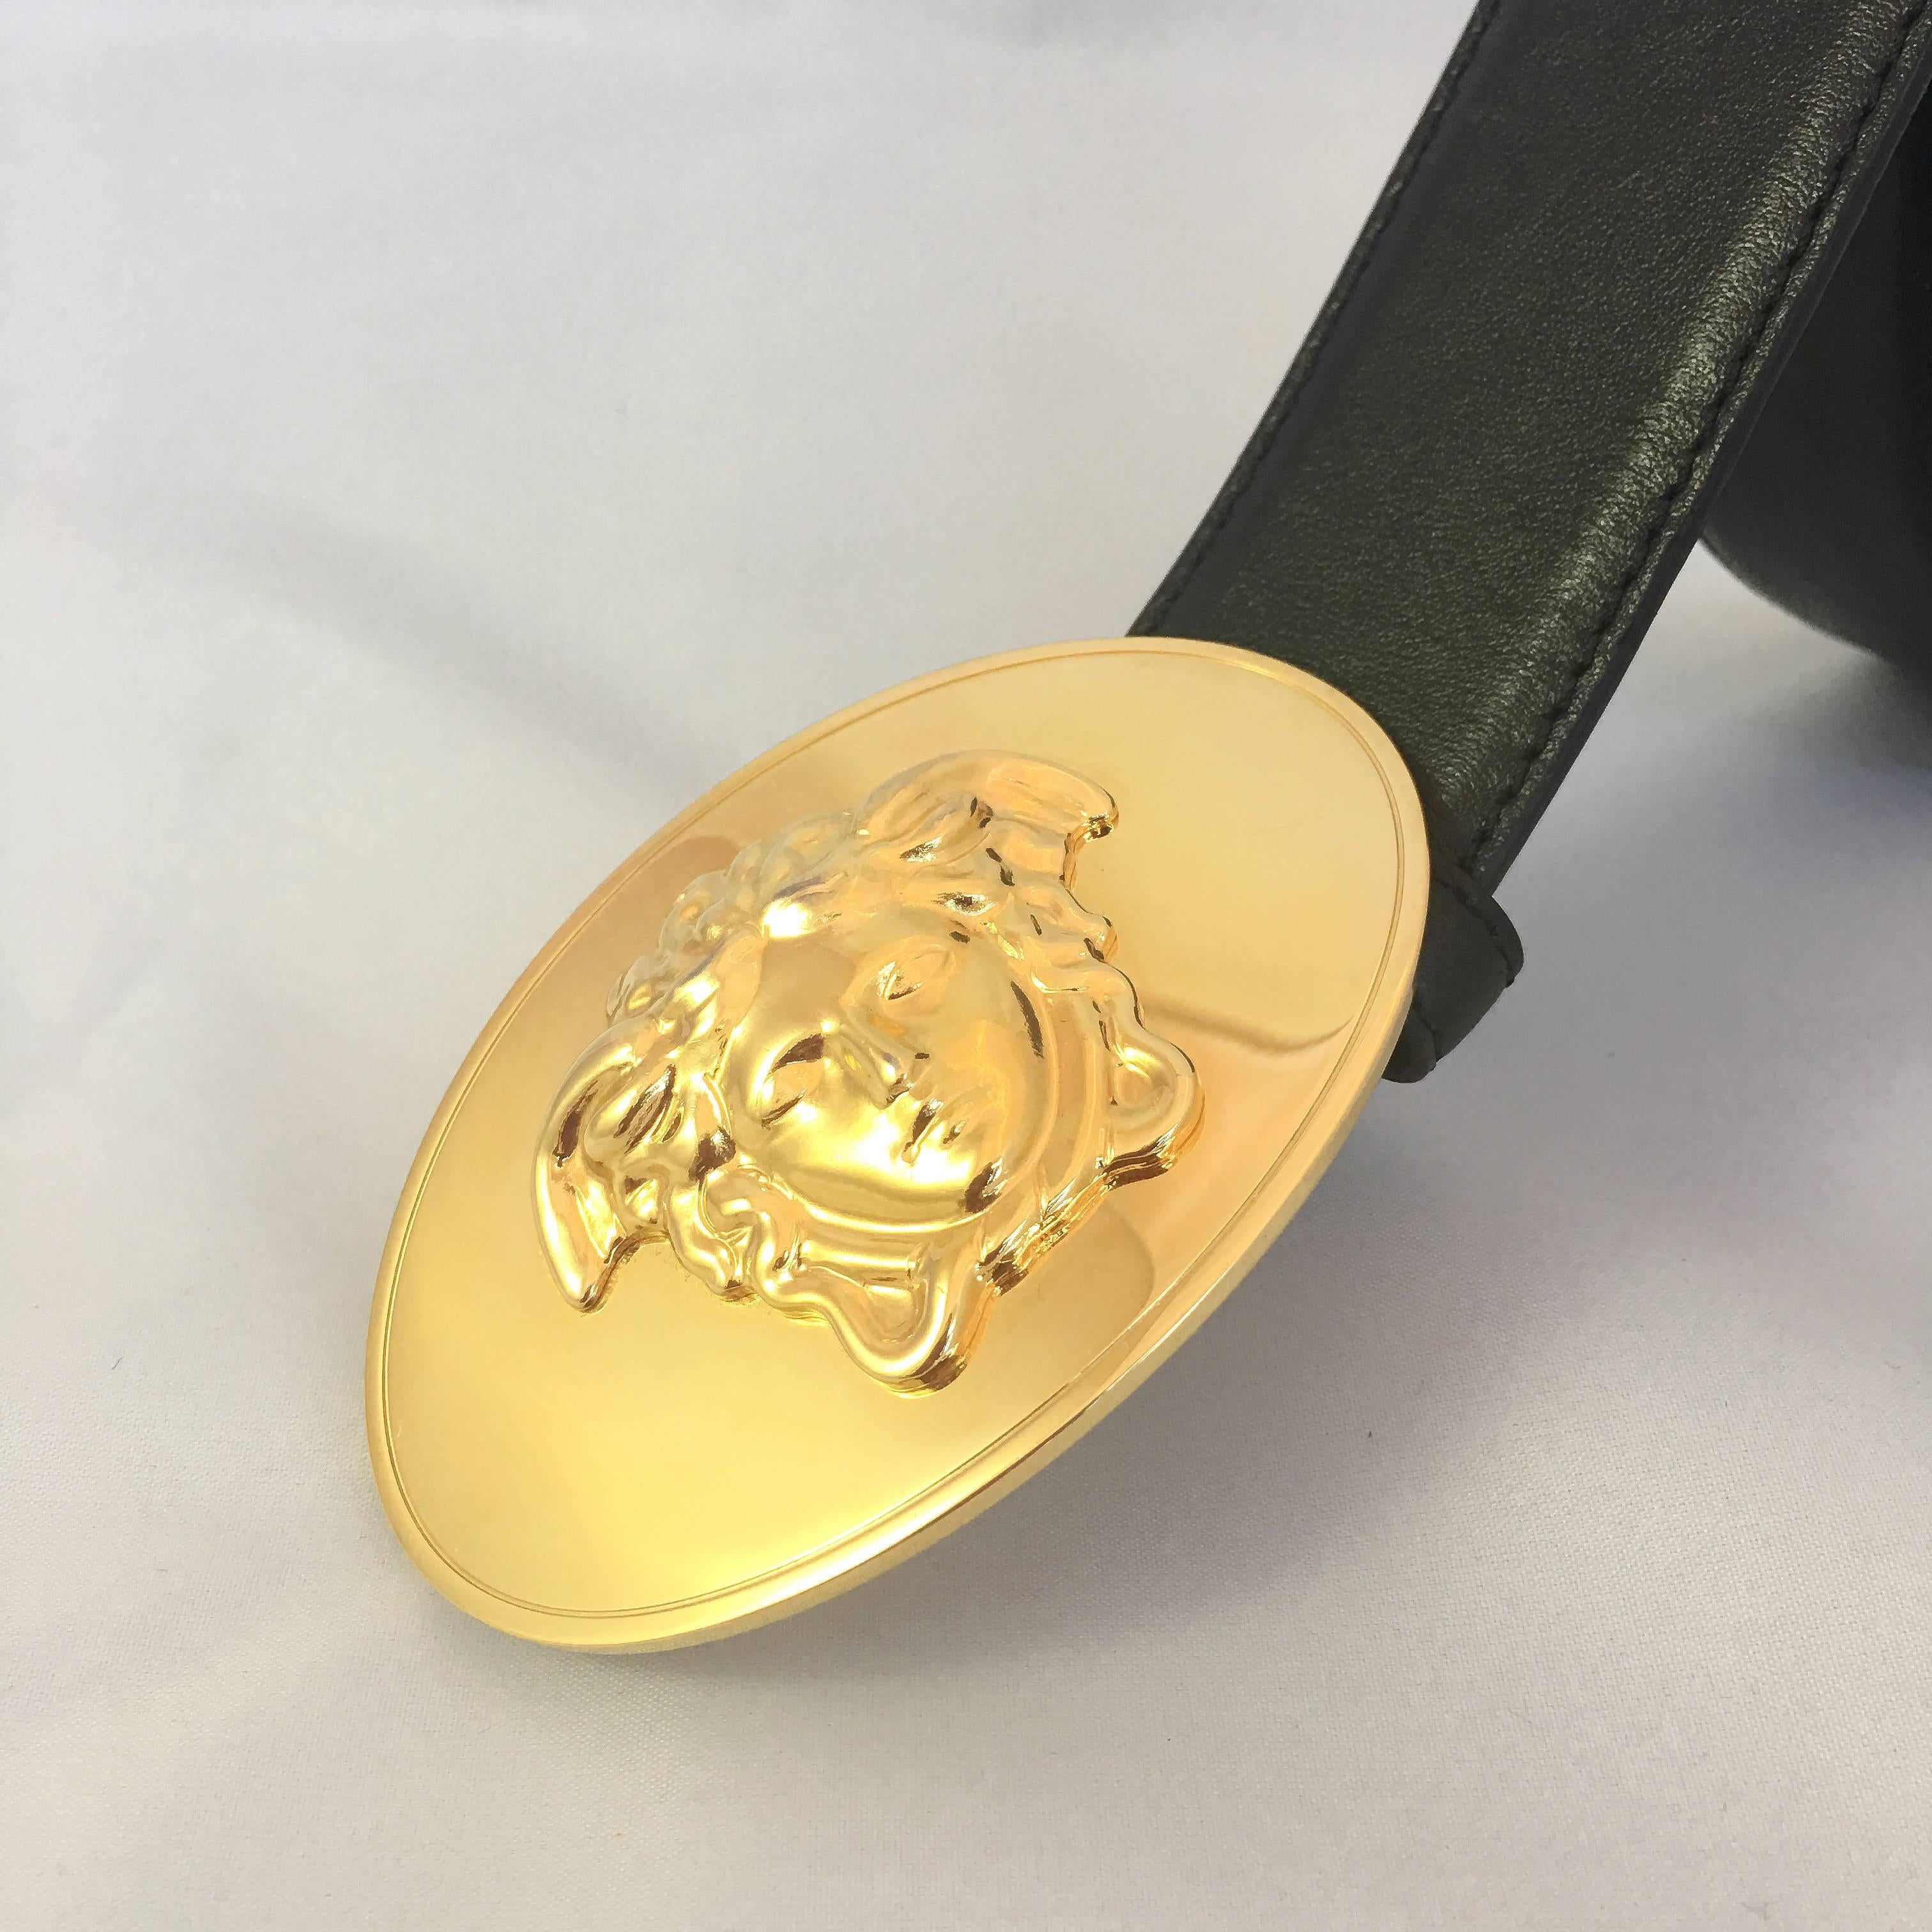 Versace black calf leather Medusa medallion belt with gold-tone hardware and an adjustable fit. 
There is a minor scratch on the buckle. (Please see last photo for reference)

Measurements:
Buckle: 3.5